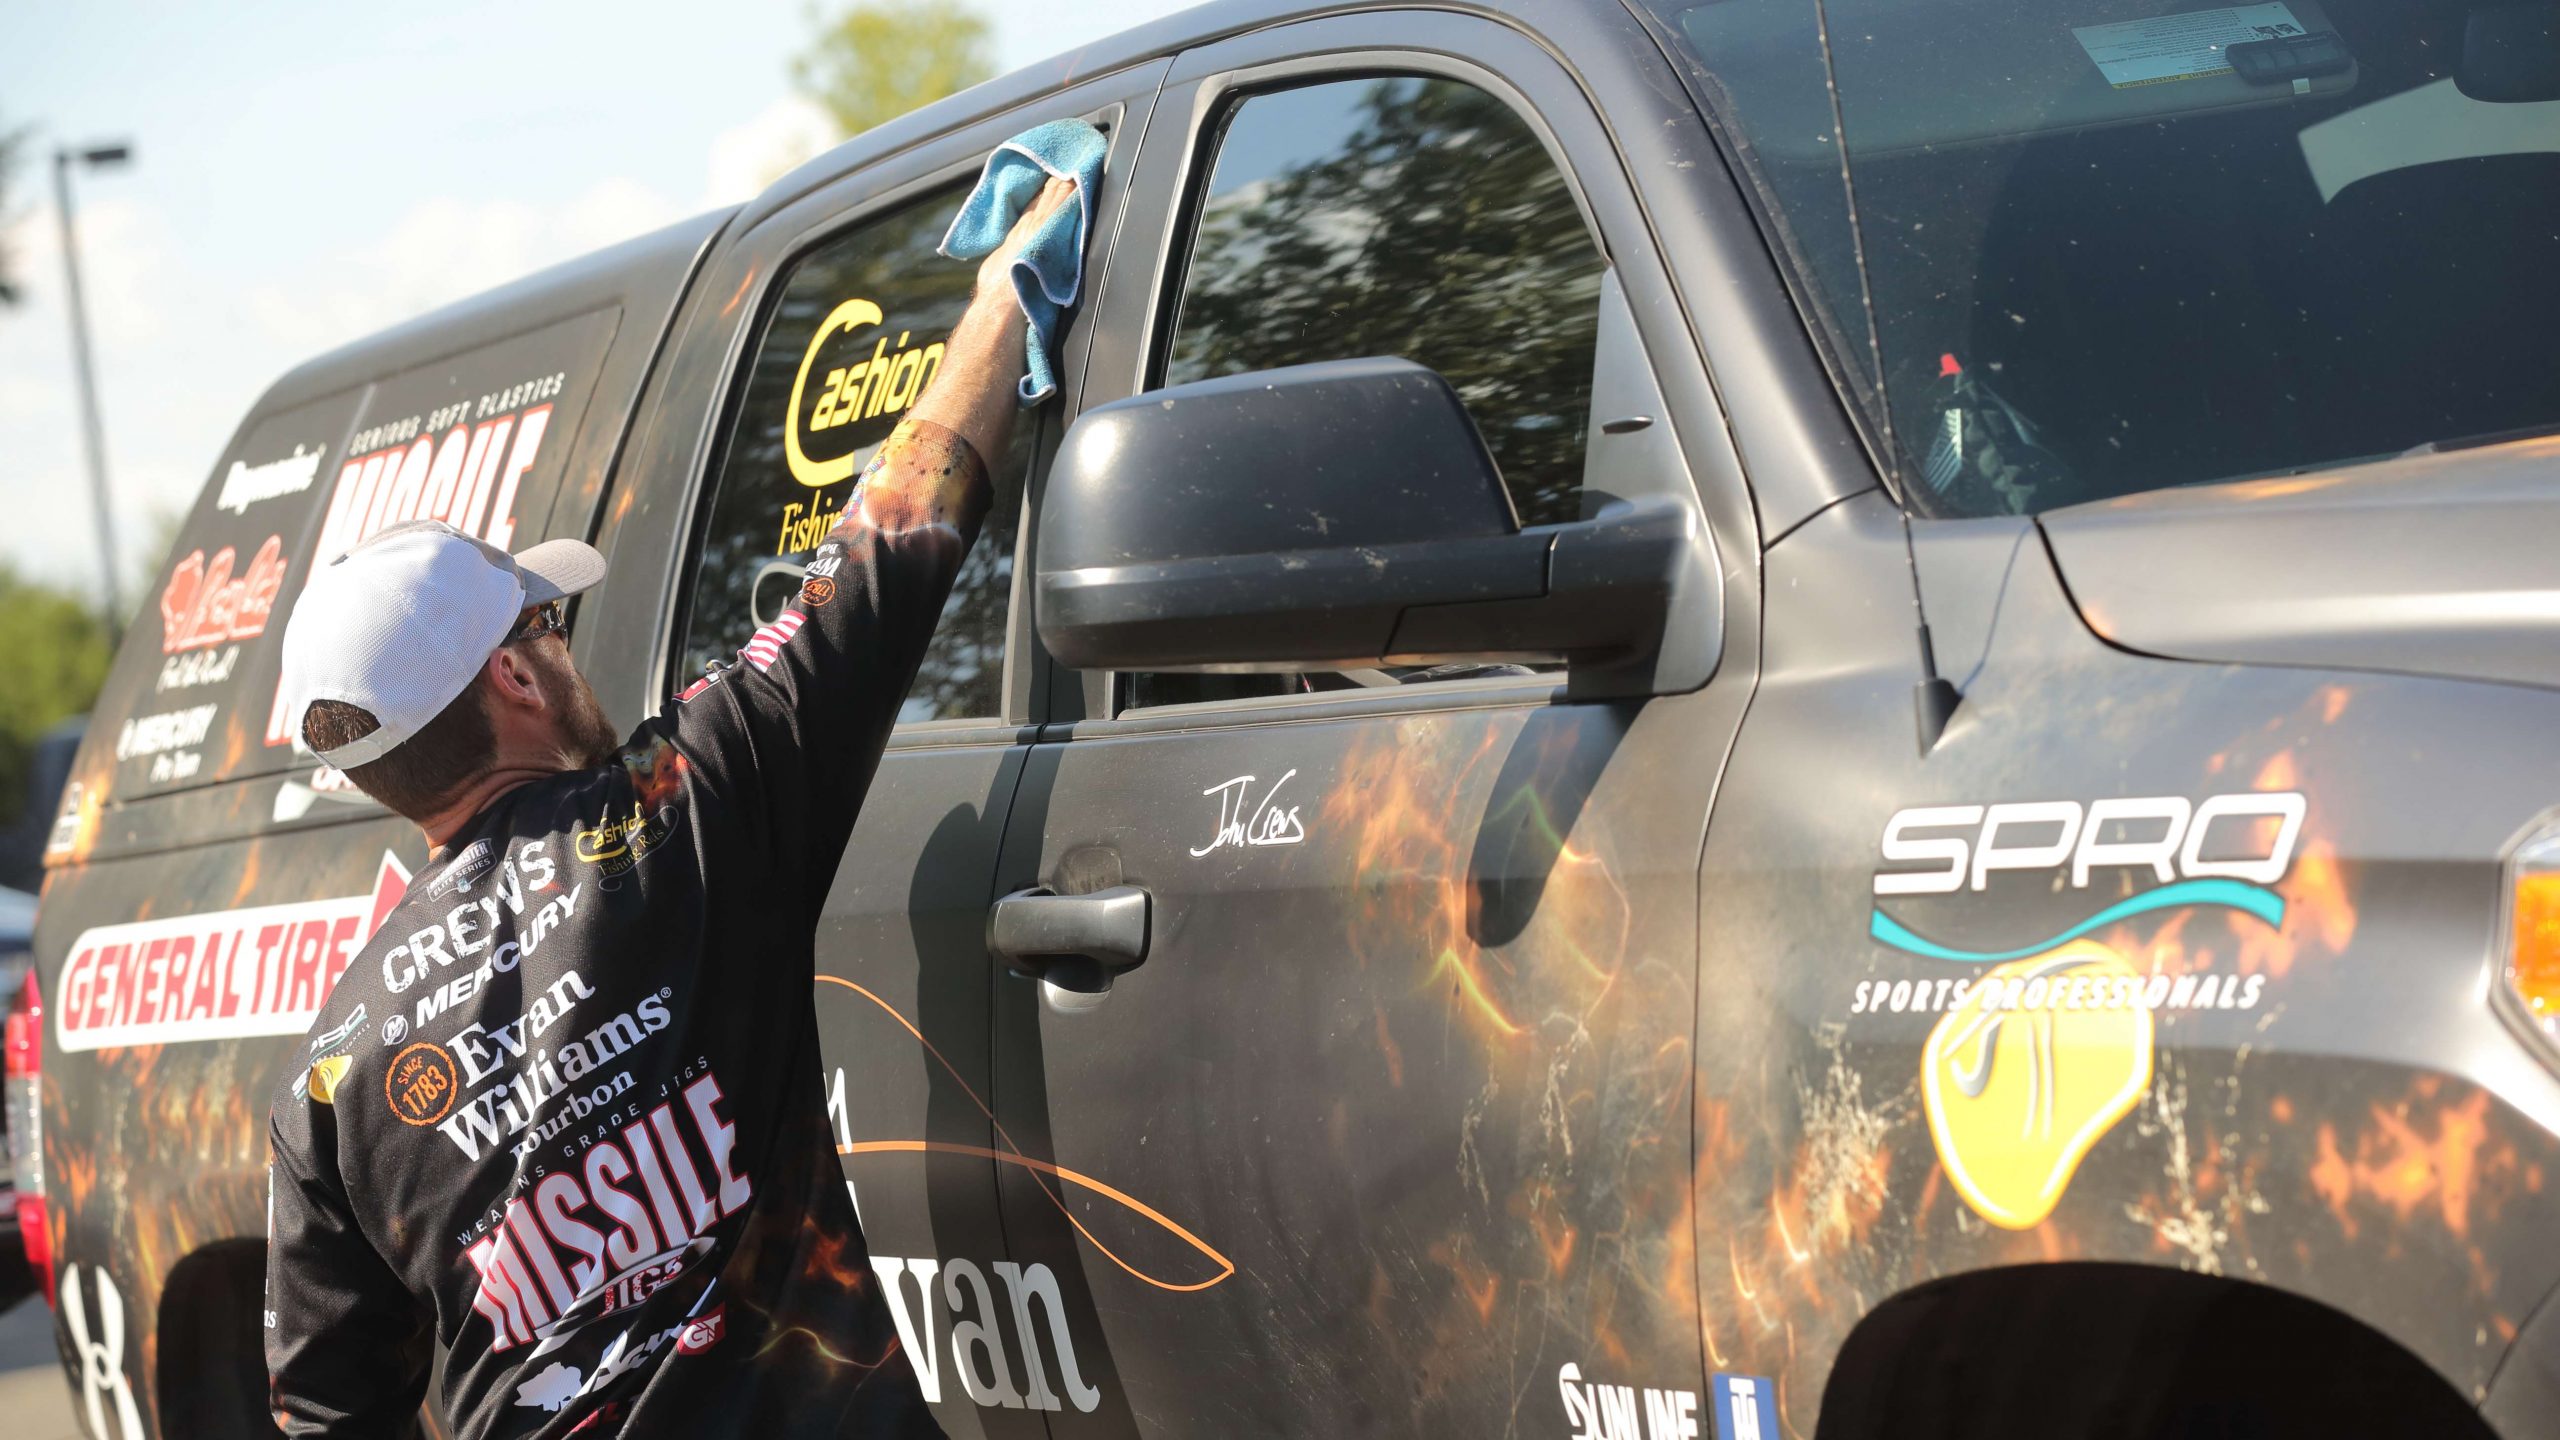 John Crews puts 35,000 miles on his Toyota  in a year between tournaments, promotions and tackle shows. 